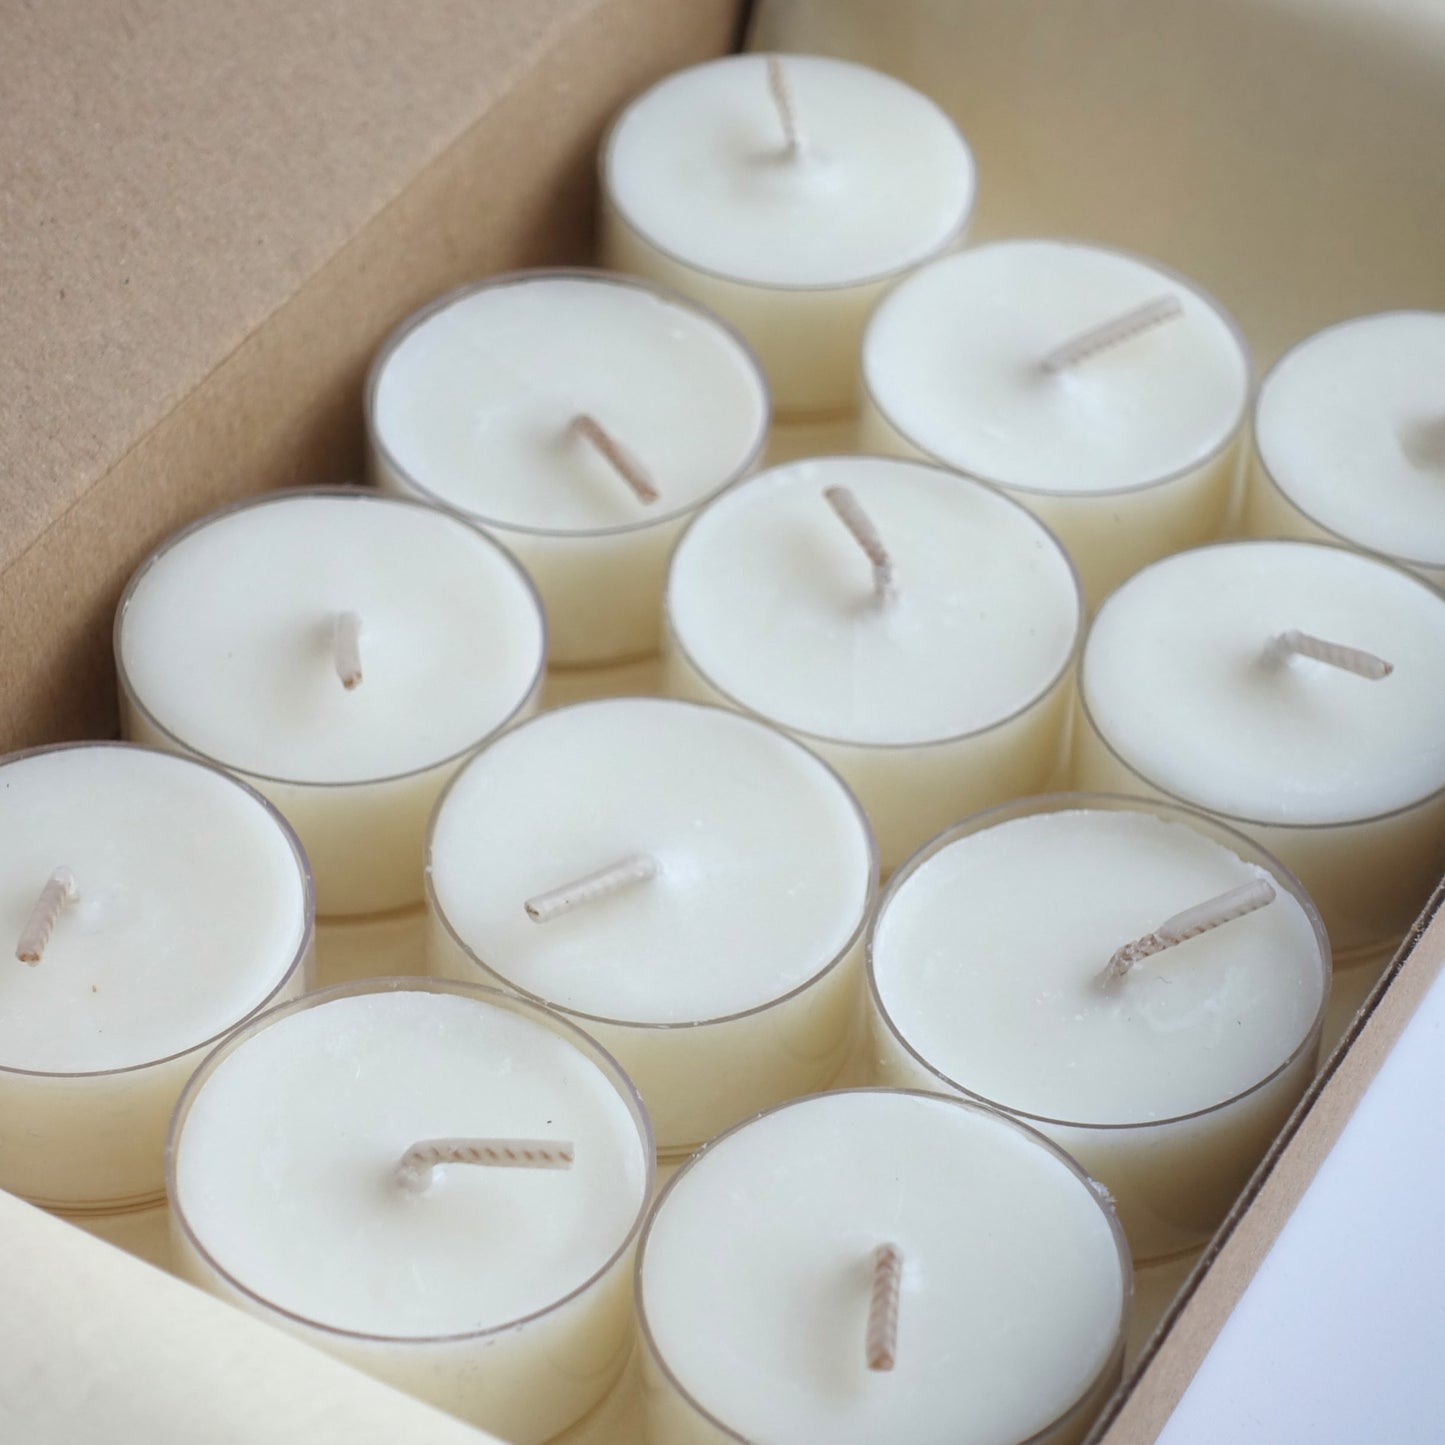 12 Shō-moon Natural Energise scented Tealights Candle with pure essential oils and clean burning natural wax in their packaging box